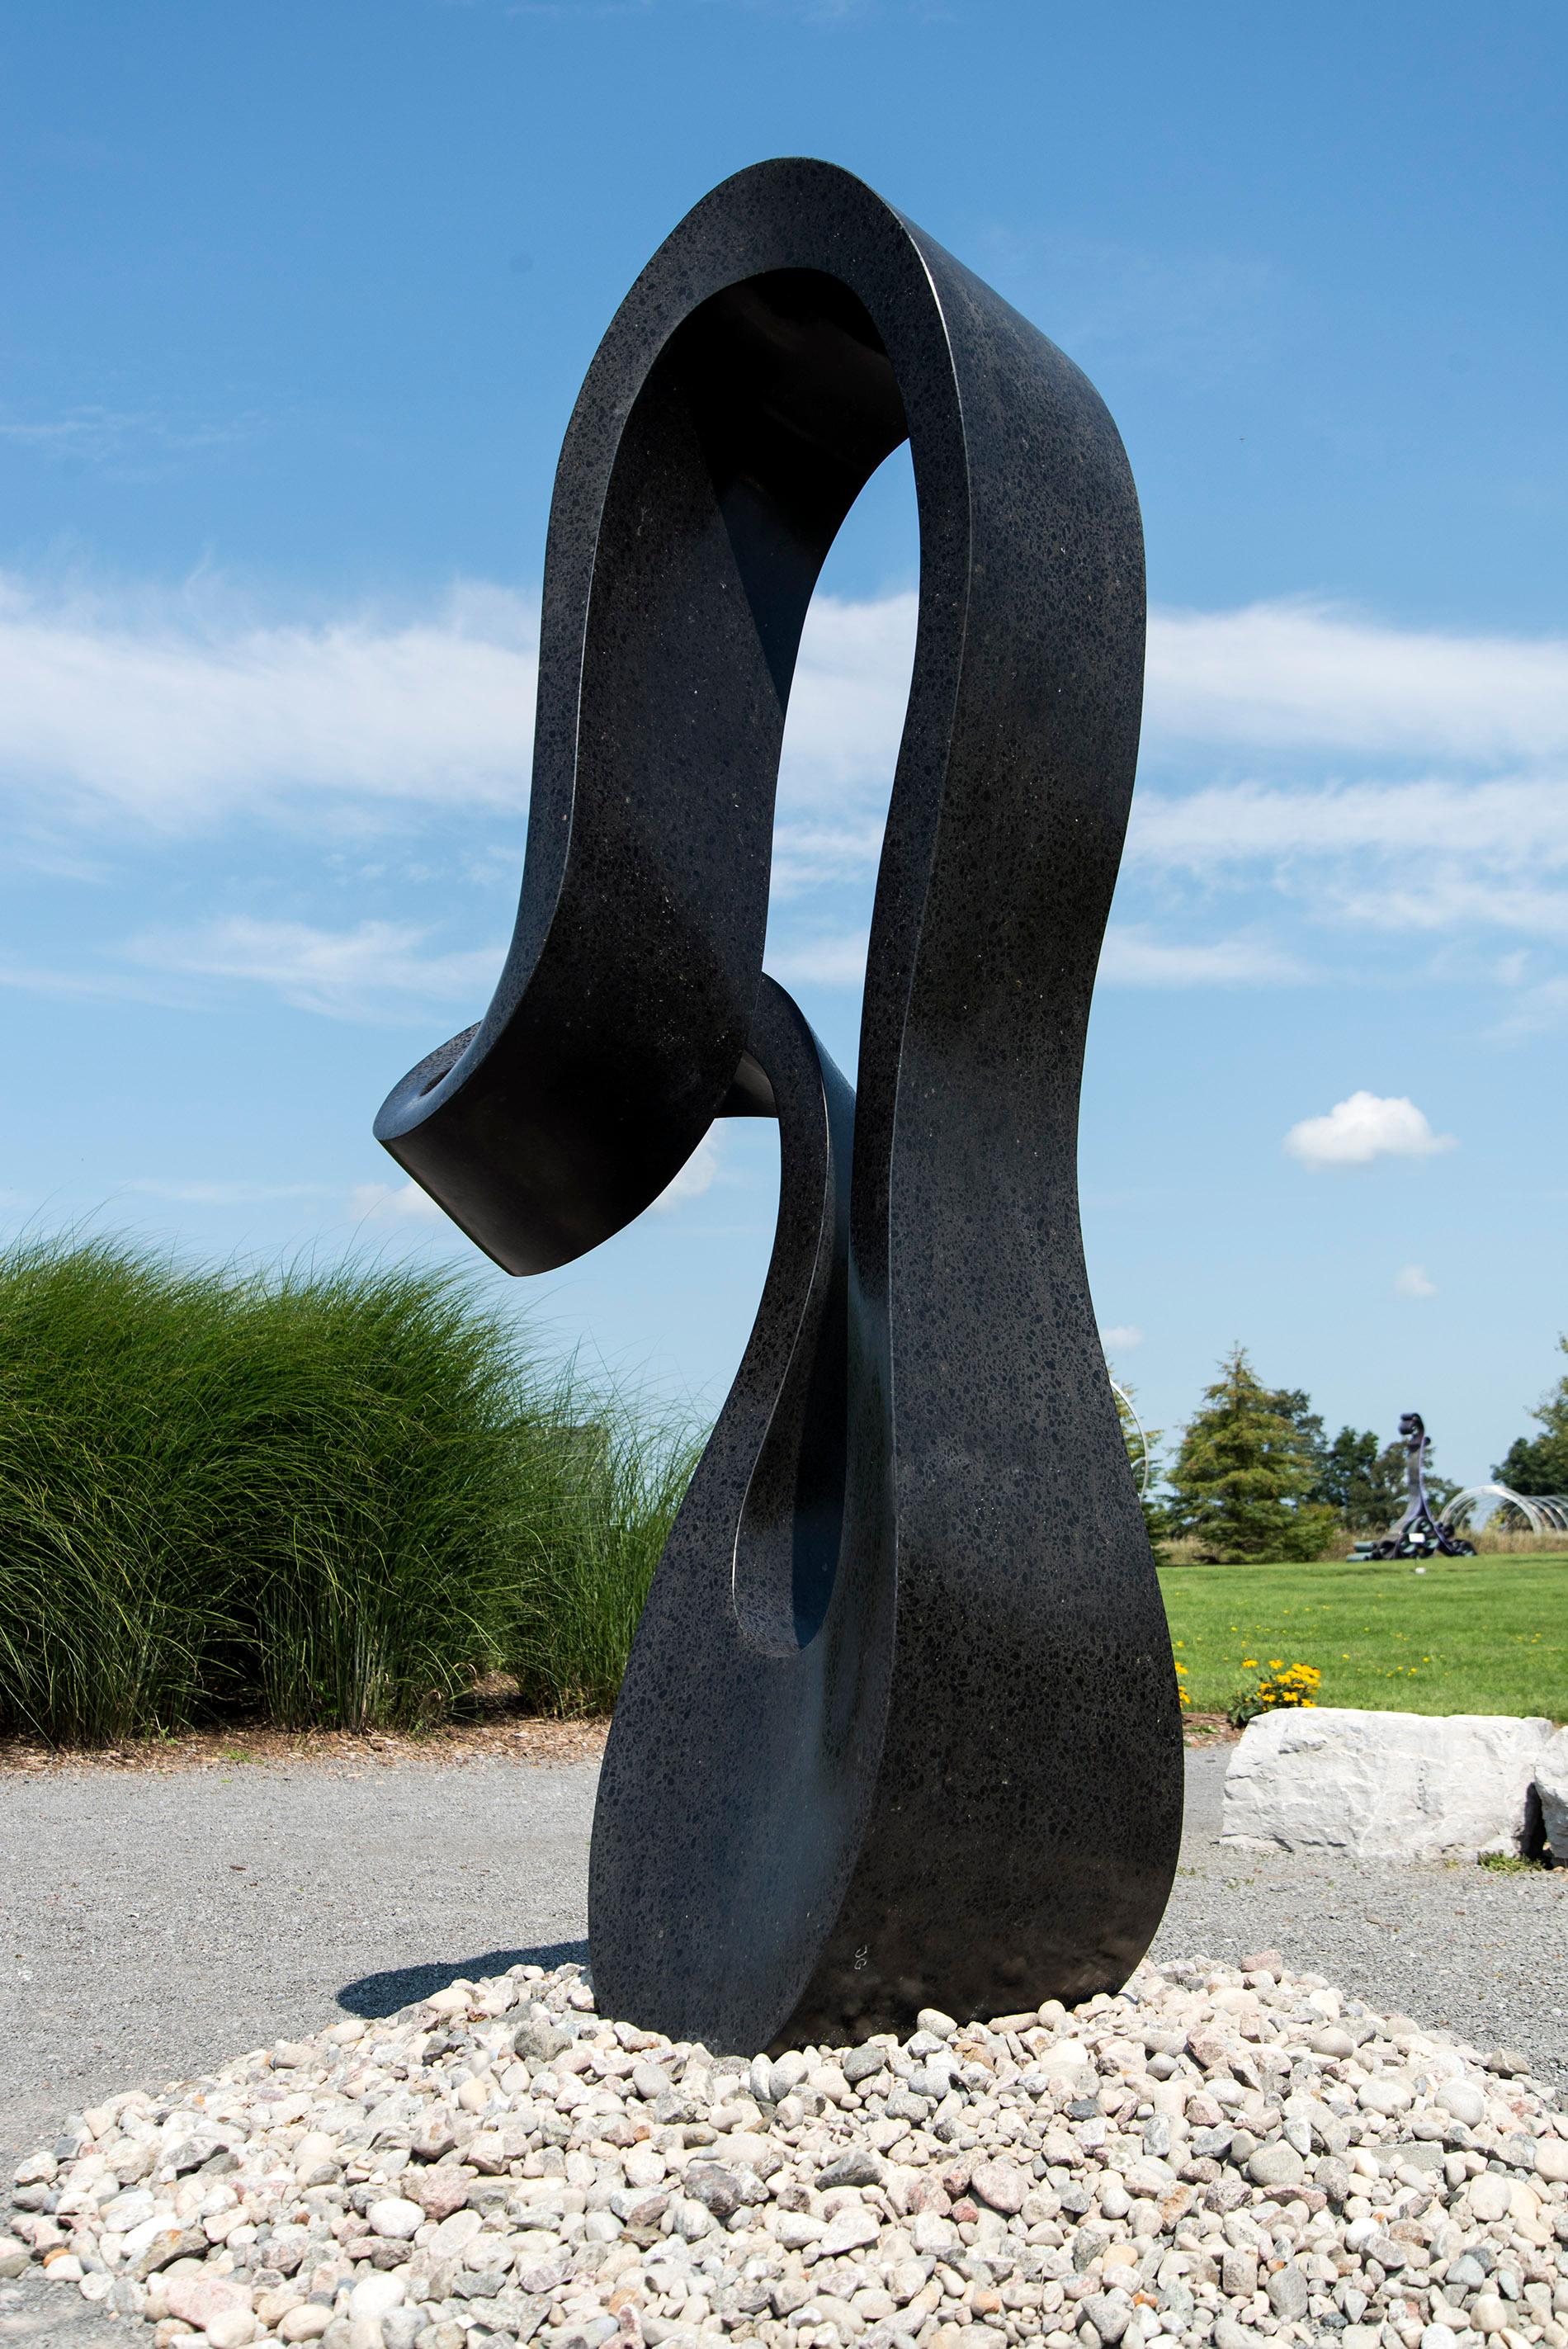 Smooth black granite engineered to resemble a time signature in music becomes an elegant outdoor sculpture by artist Jeremy Guy. 

